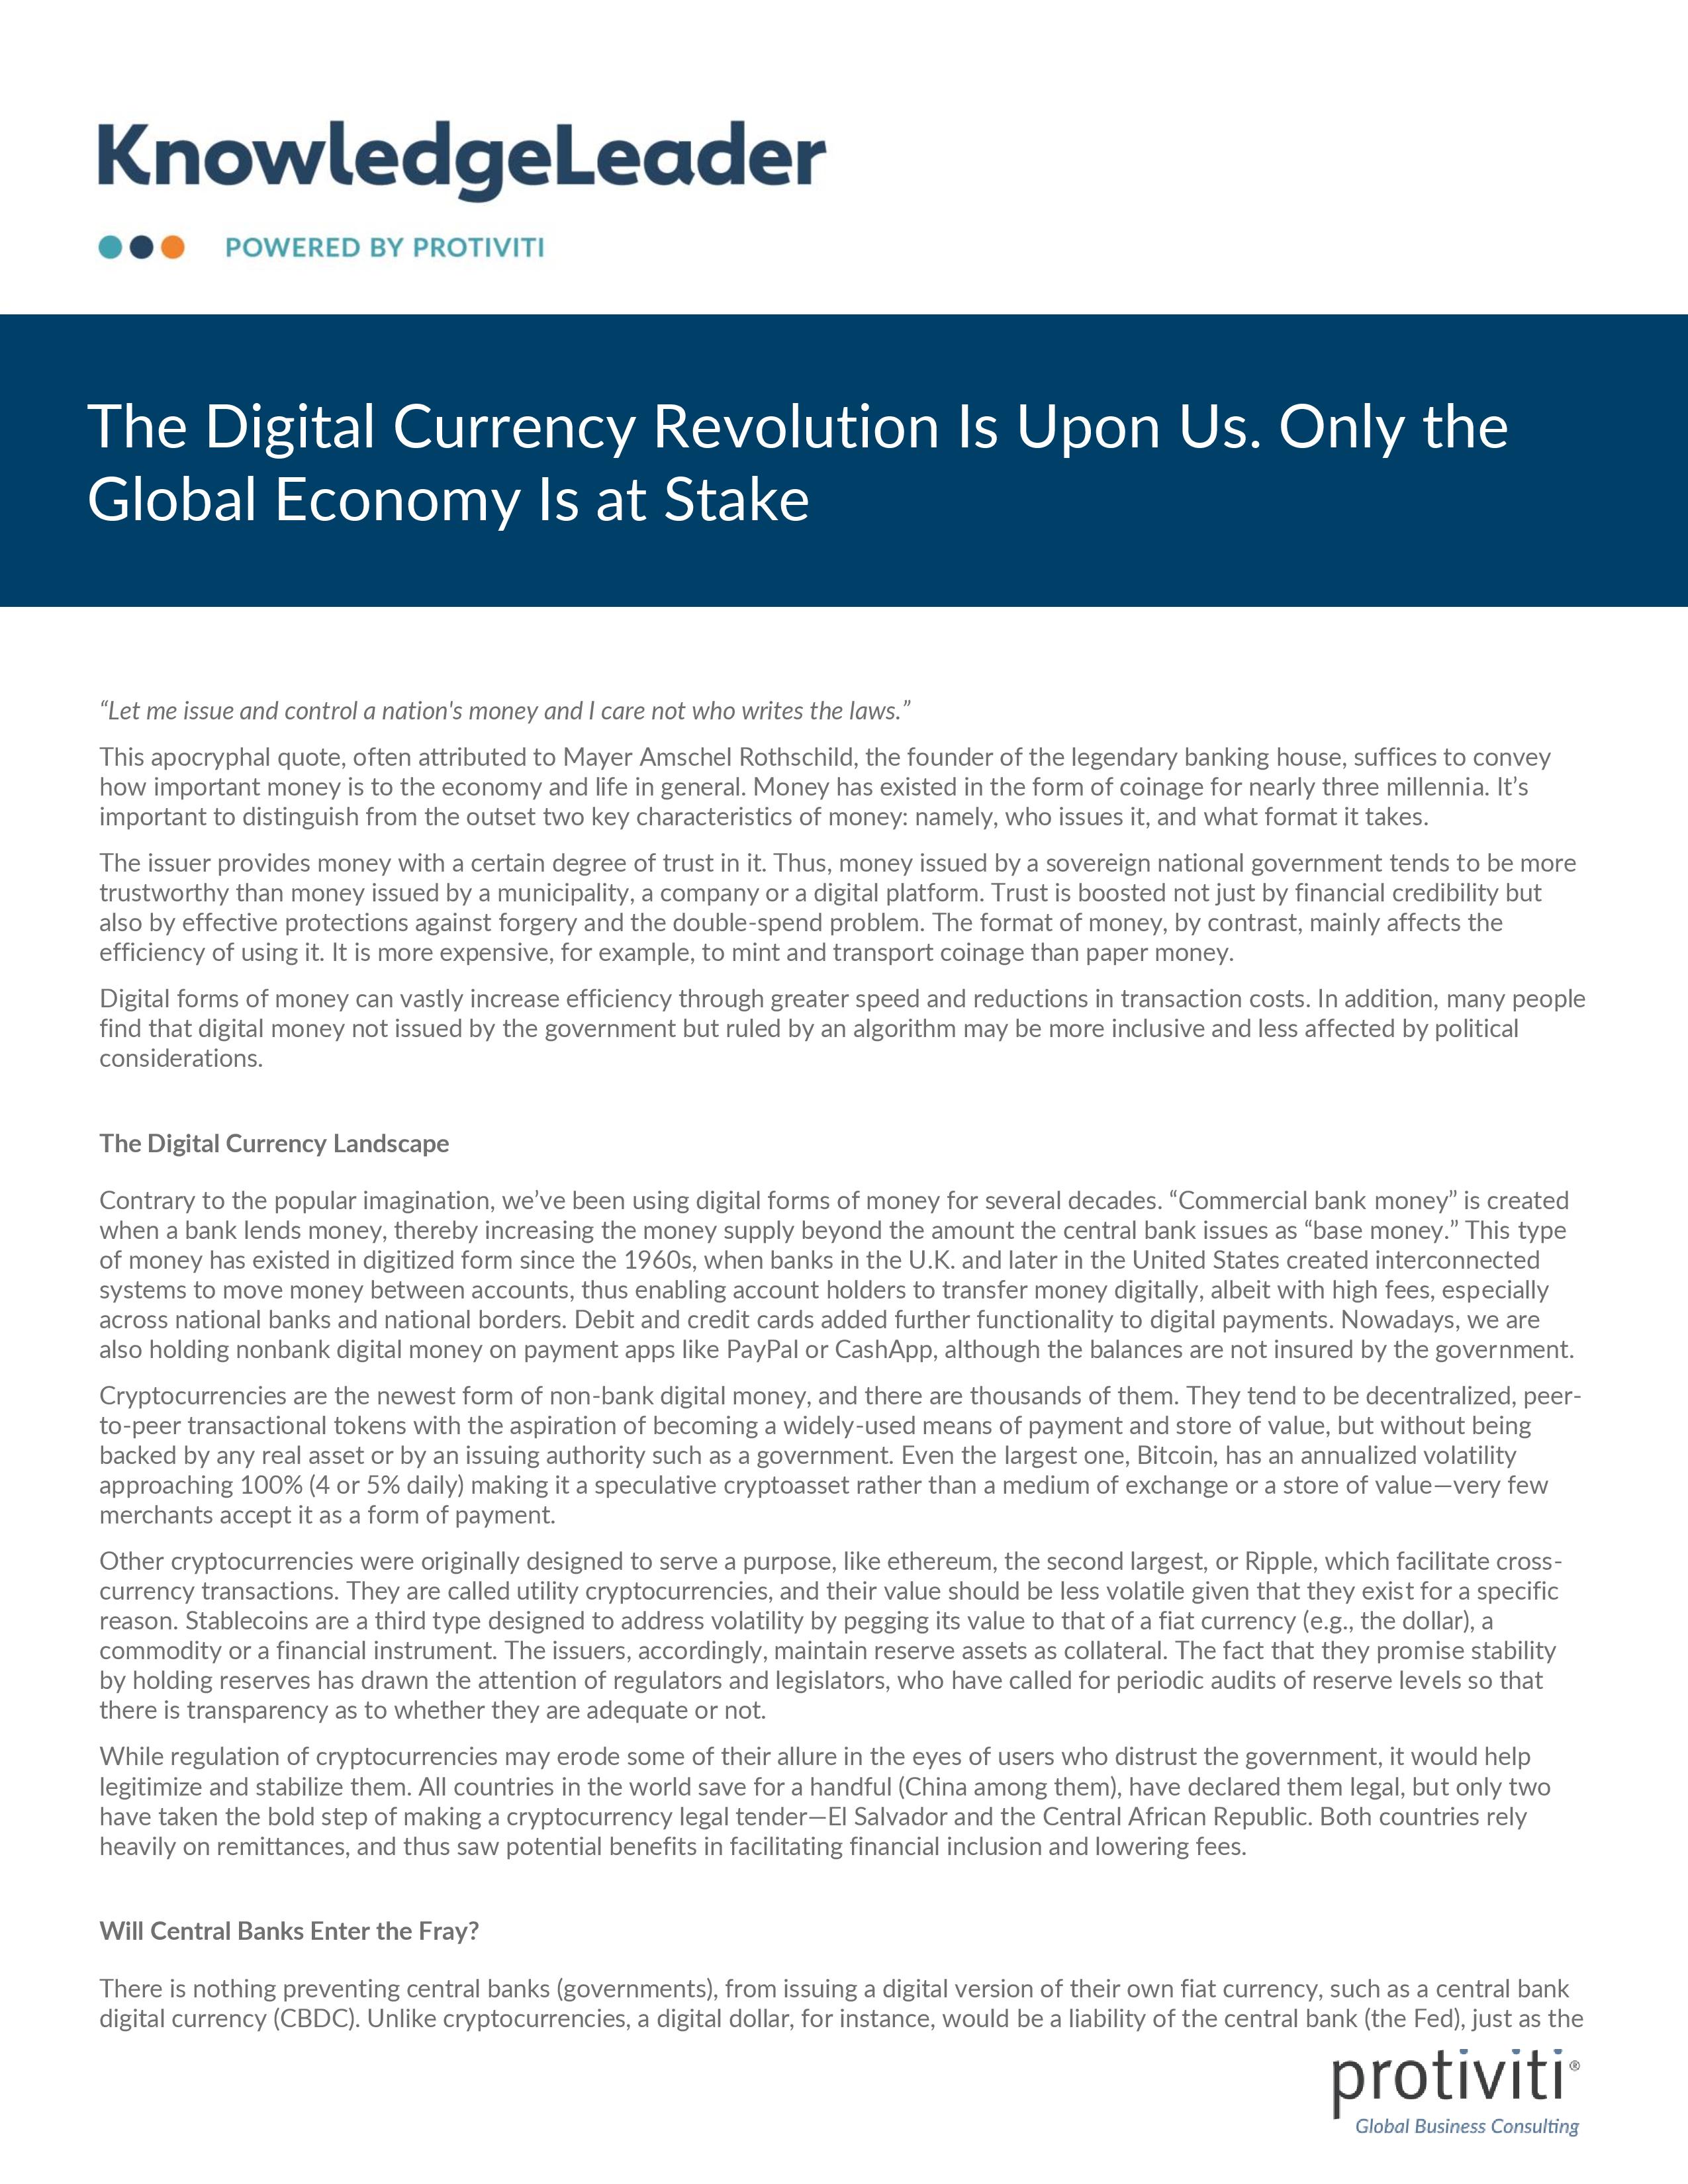 Screenshot of the first page of The Digital Currency Revolution Is Upon Us. Only the Global Economy Is at Stake